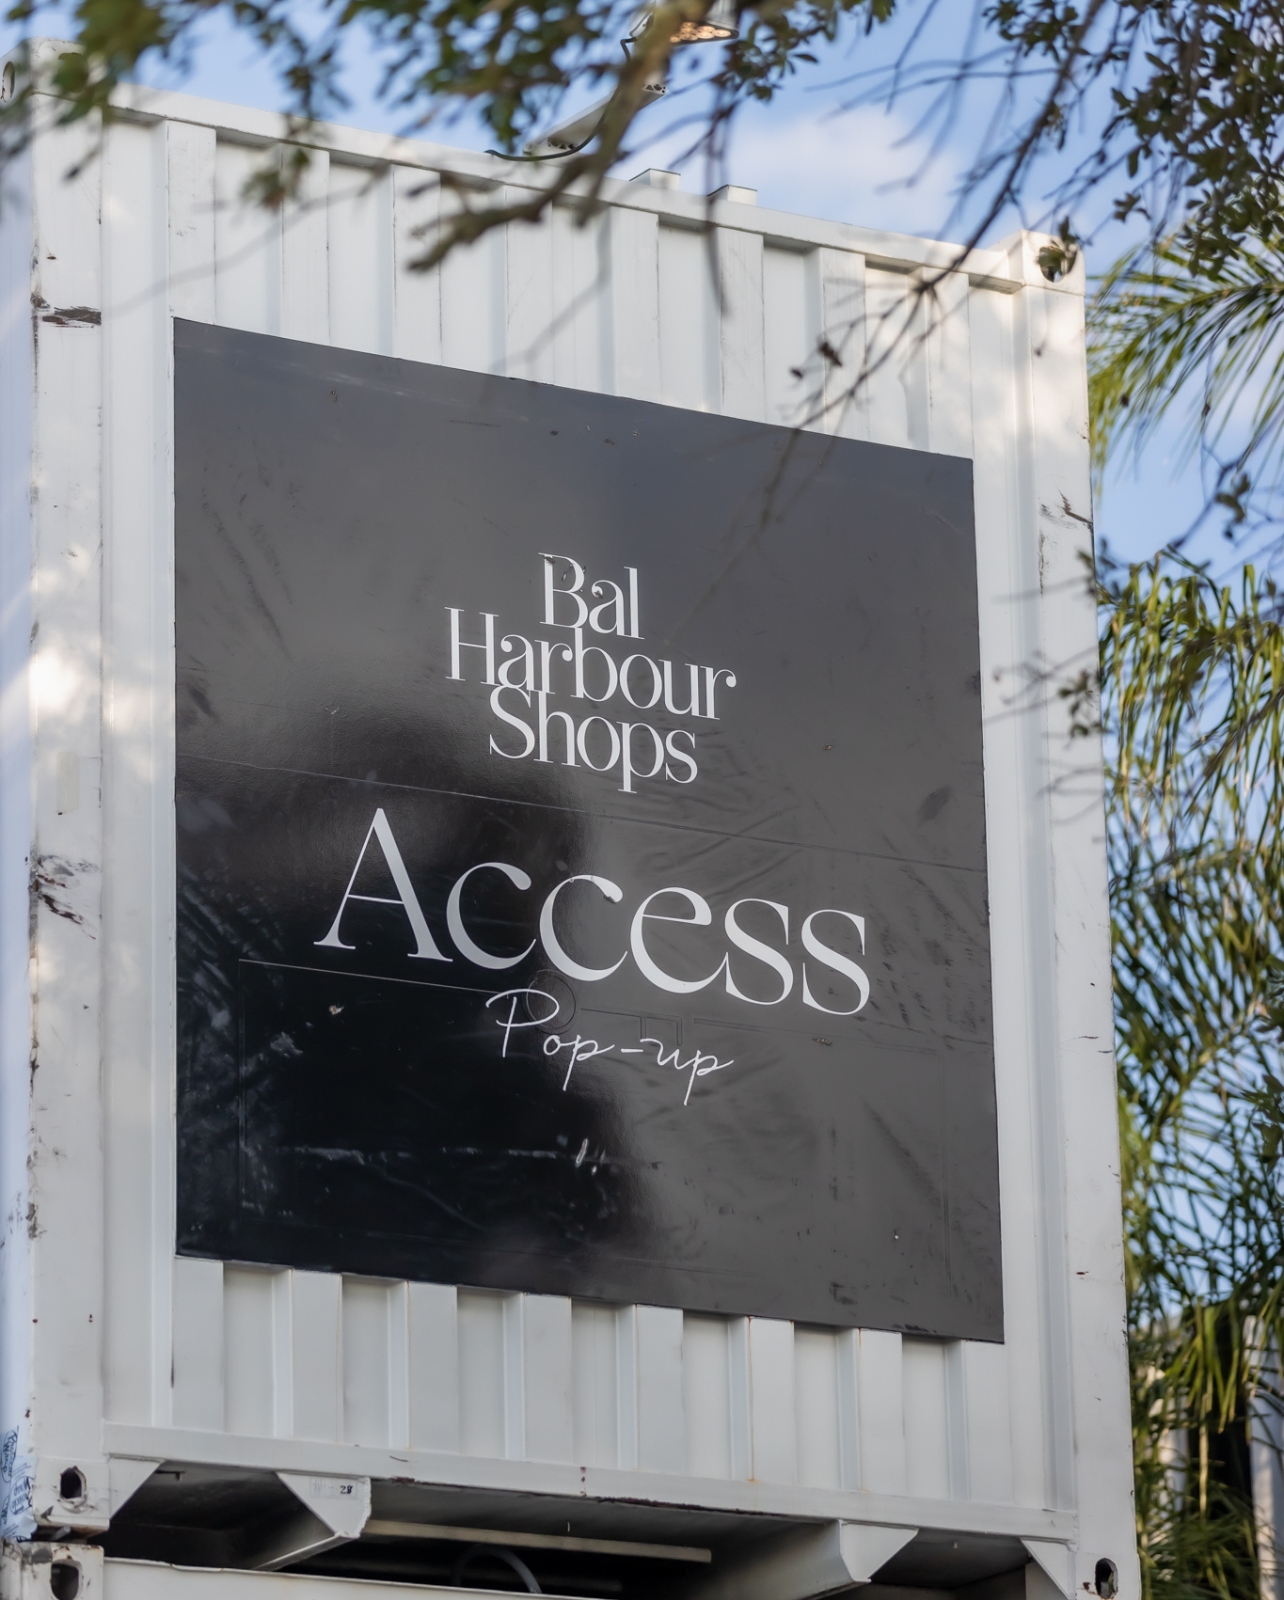 Entrance Signage to the Bal Harbour Shops Access Pop-up